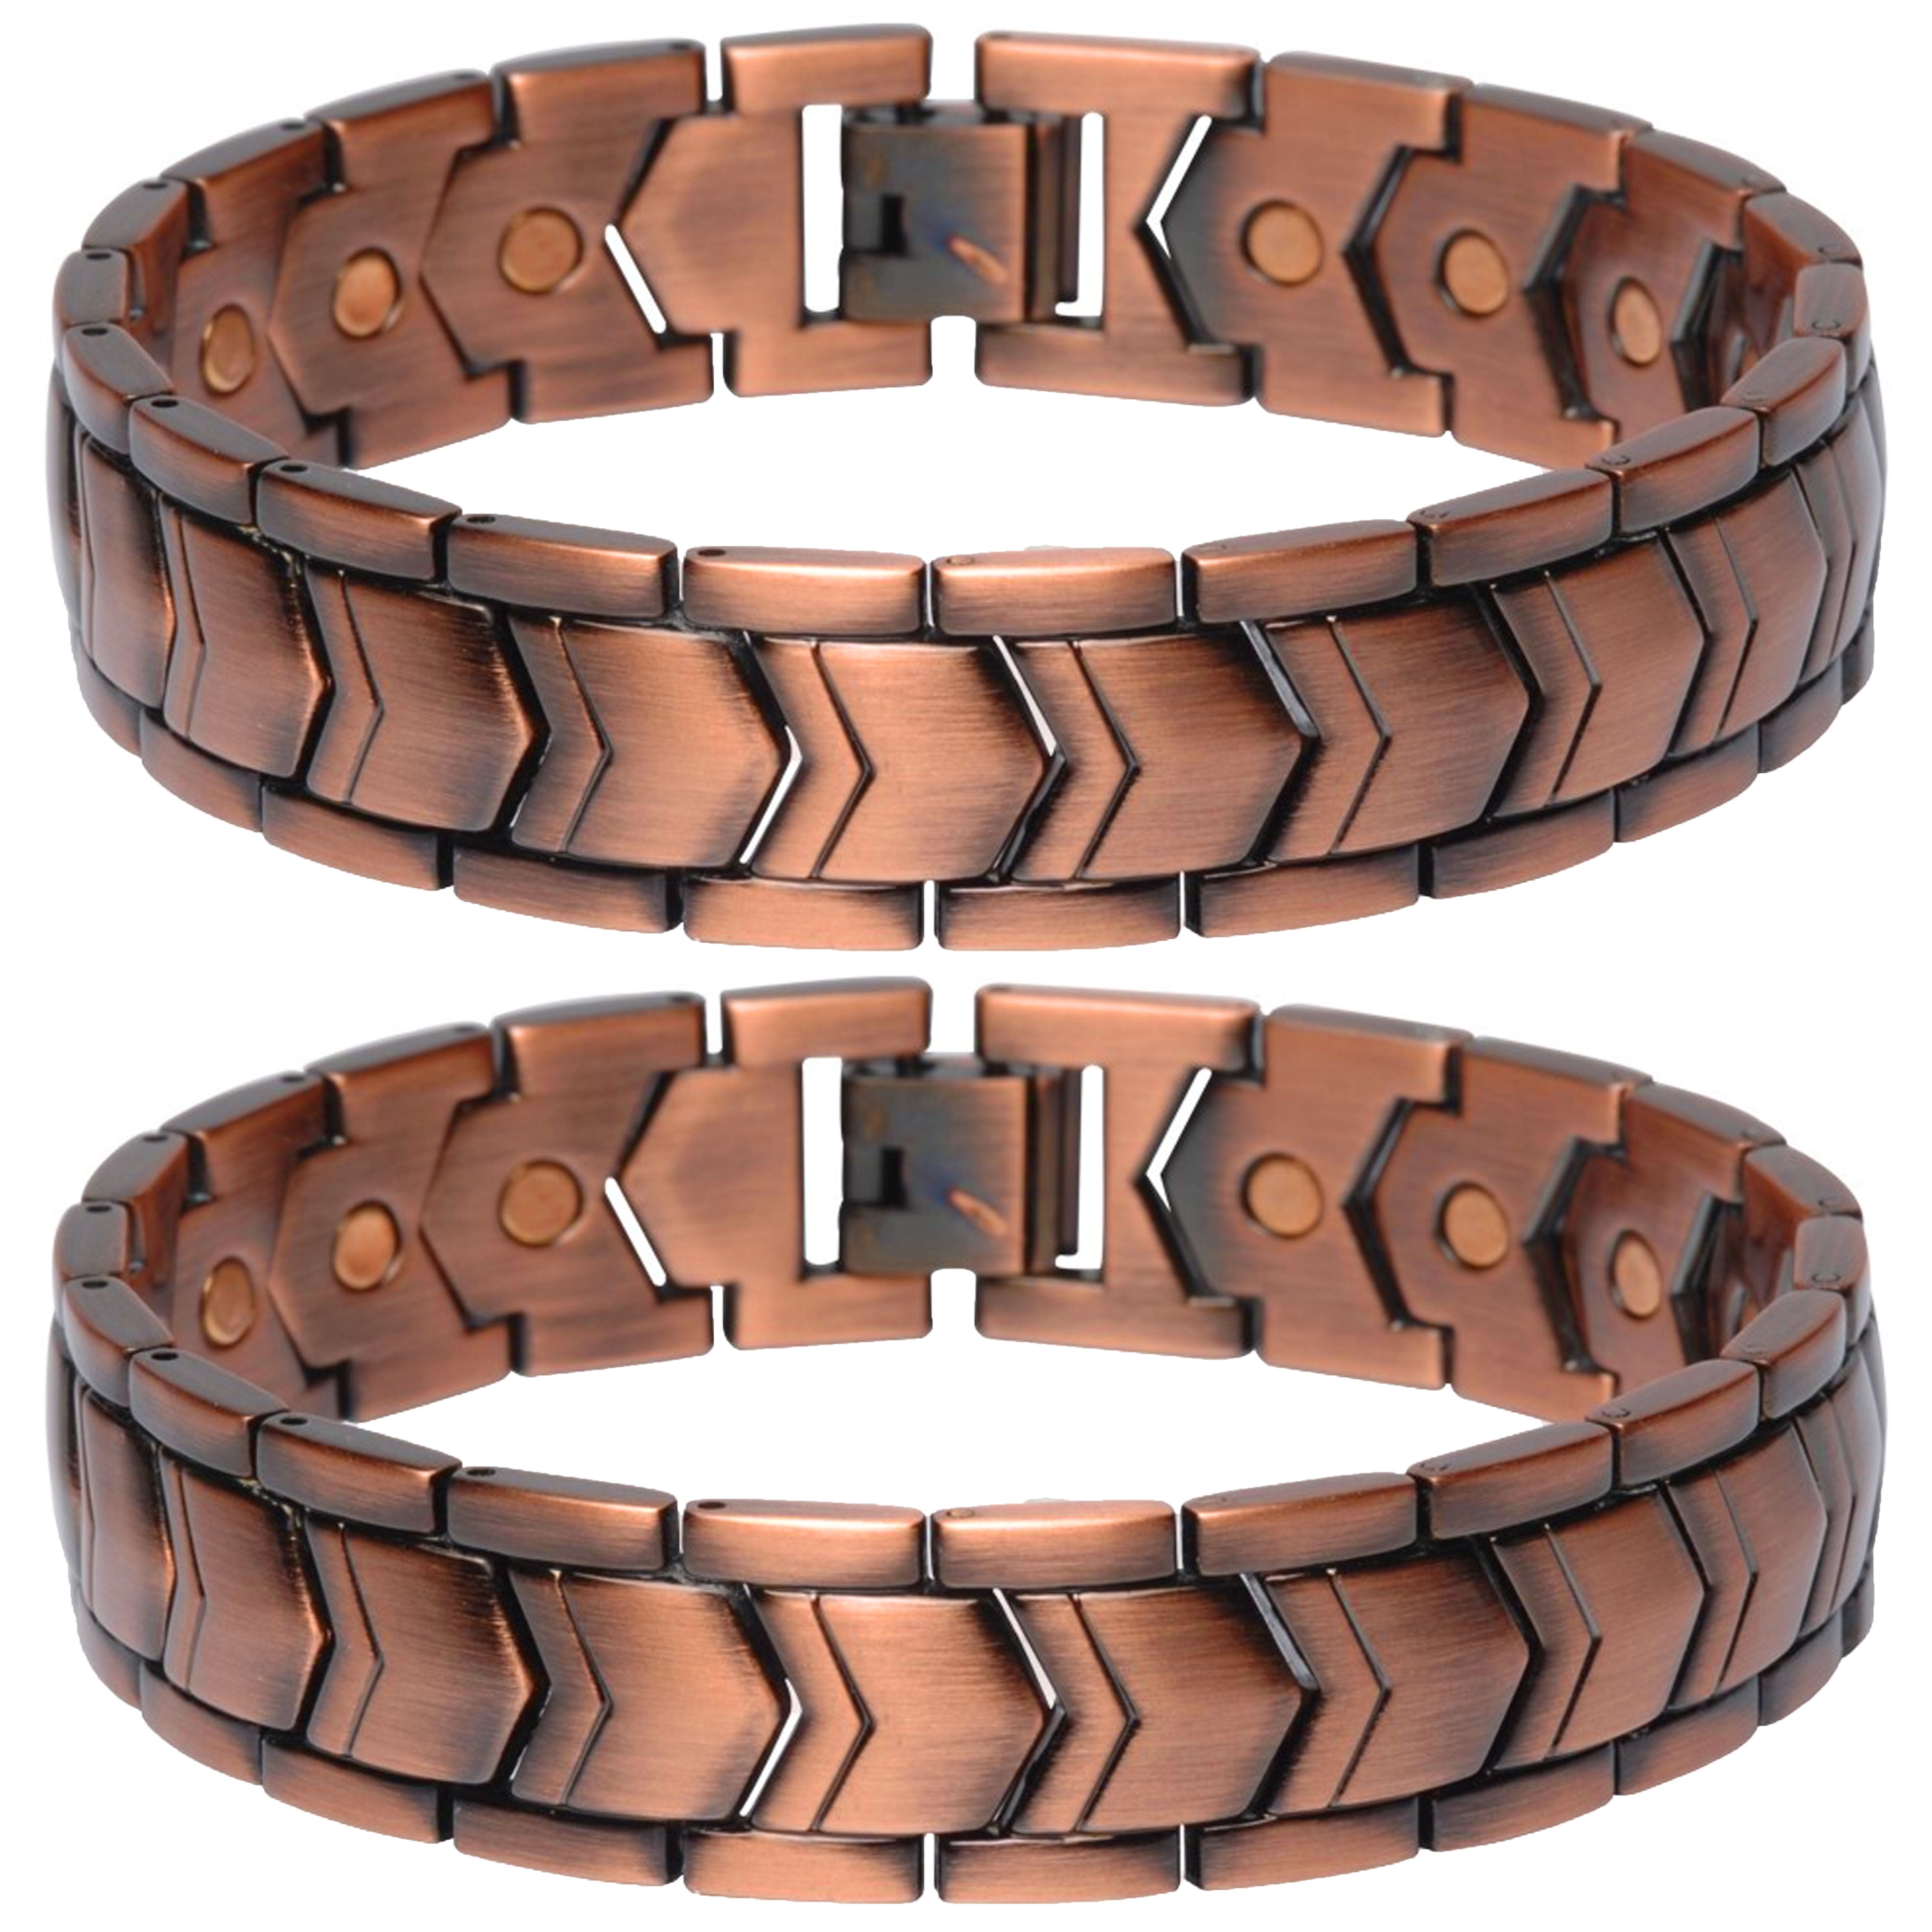 Pure Copper Bracelet Magnetic Arthritis Therapy Energy Healing Pain Relief  Gift | eBay